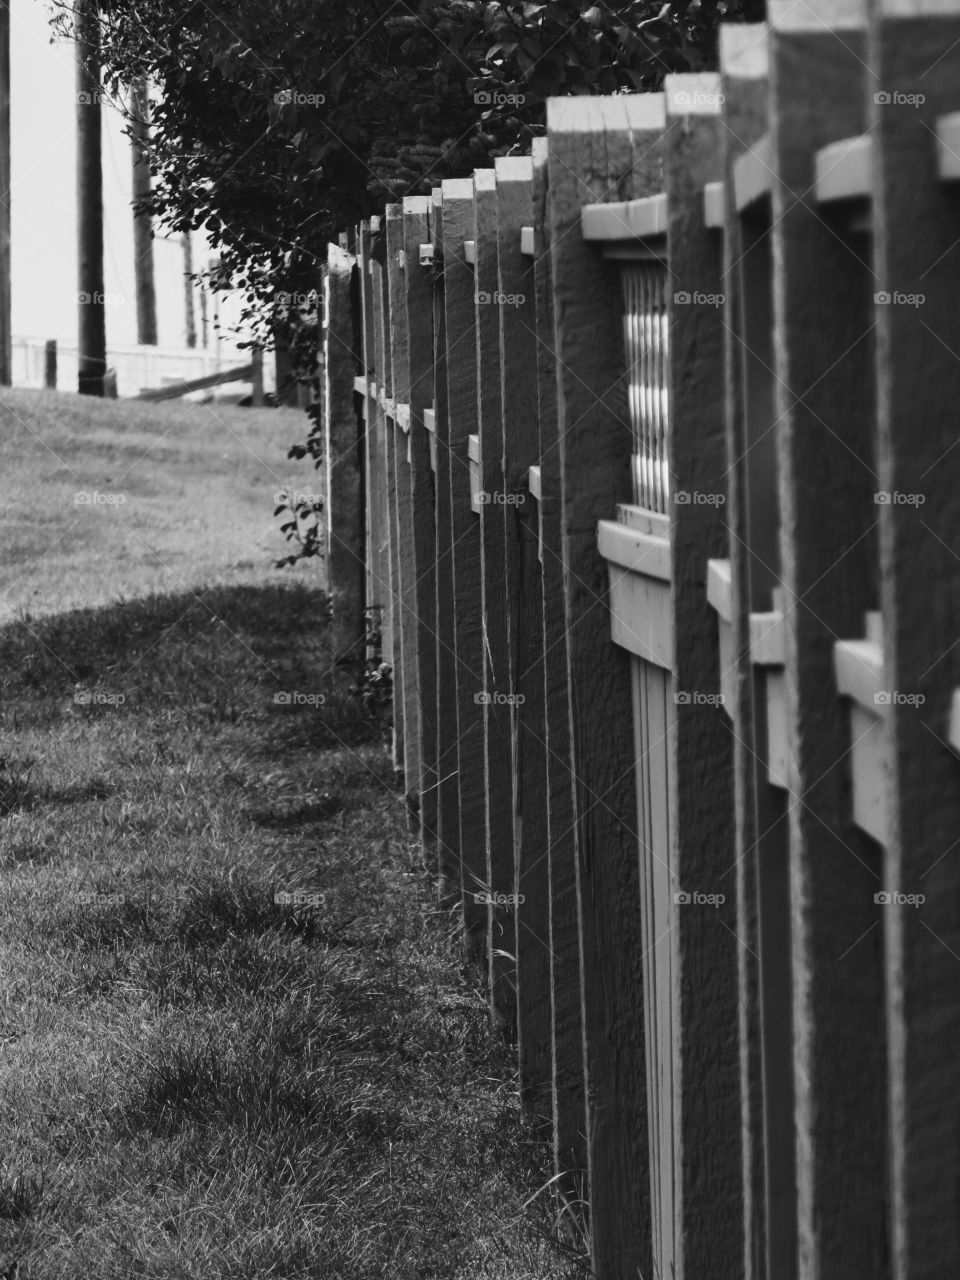 Fence in black and white, on my walk this morning